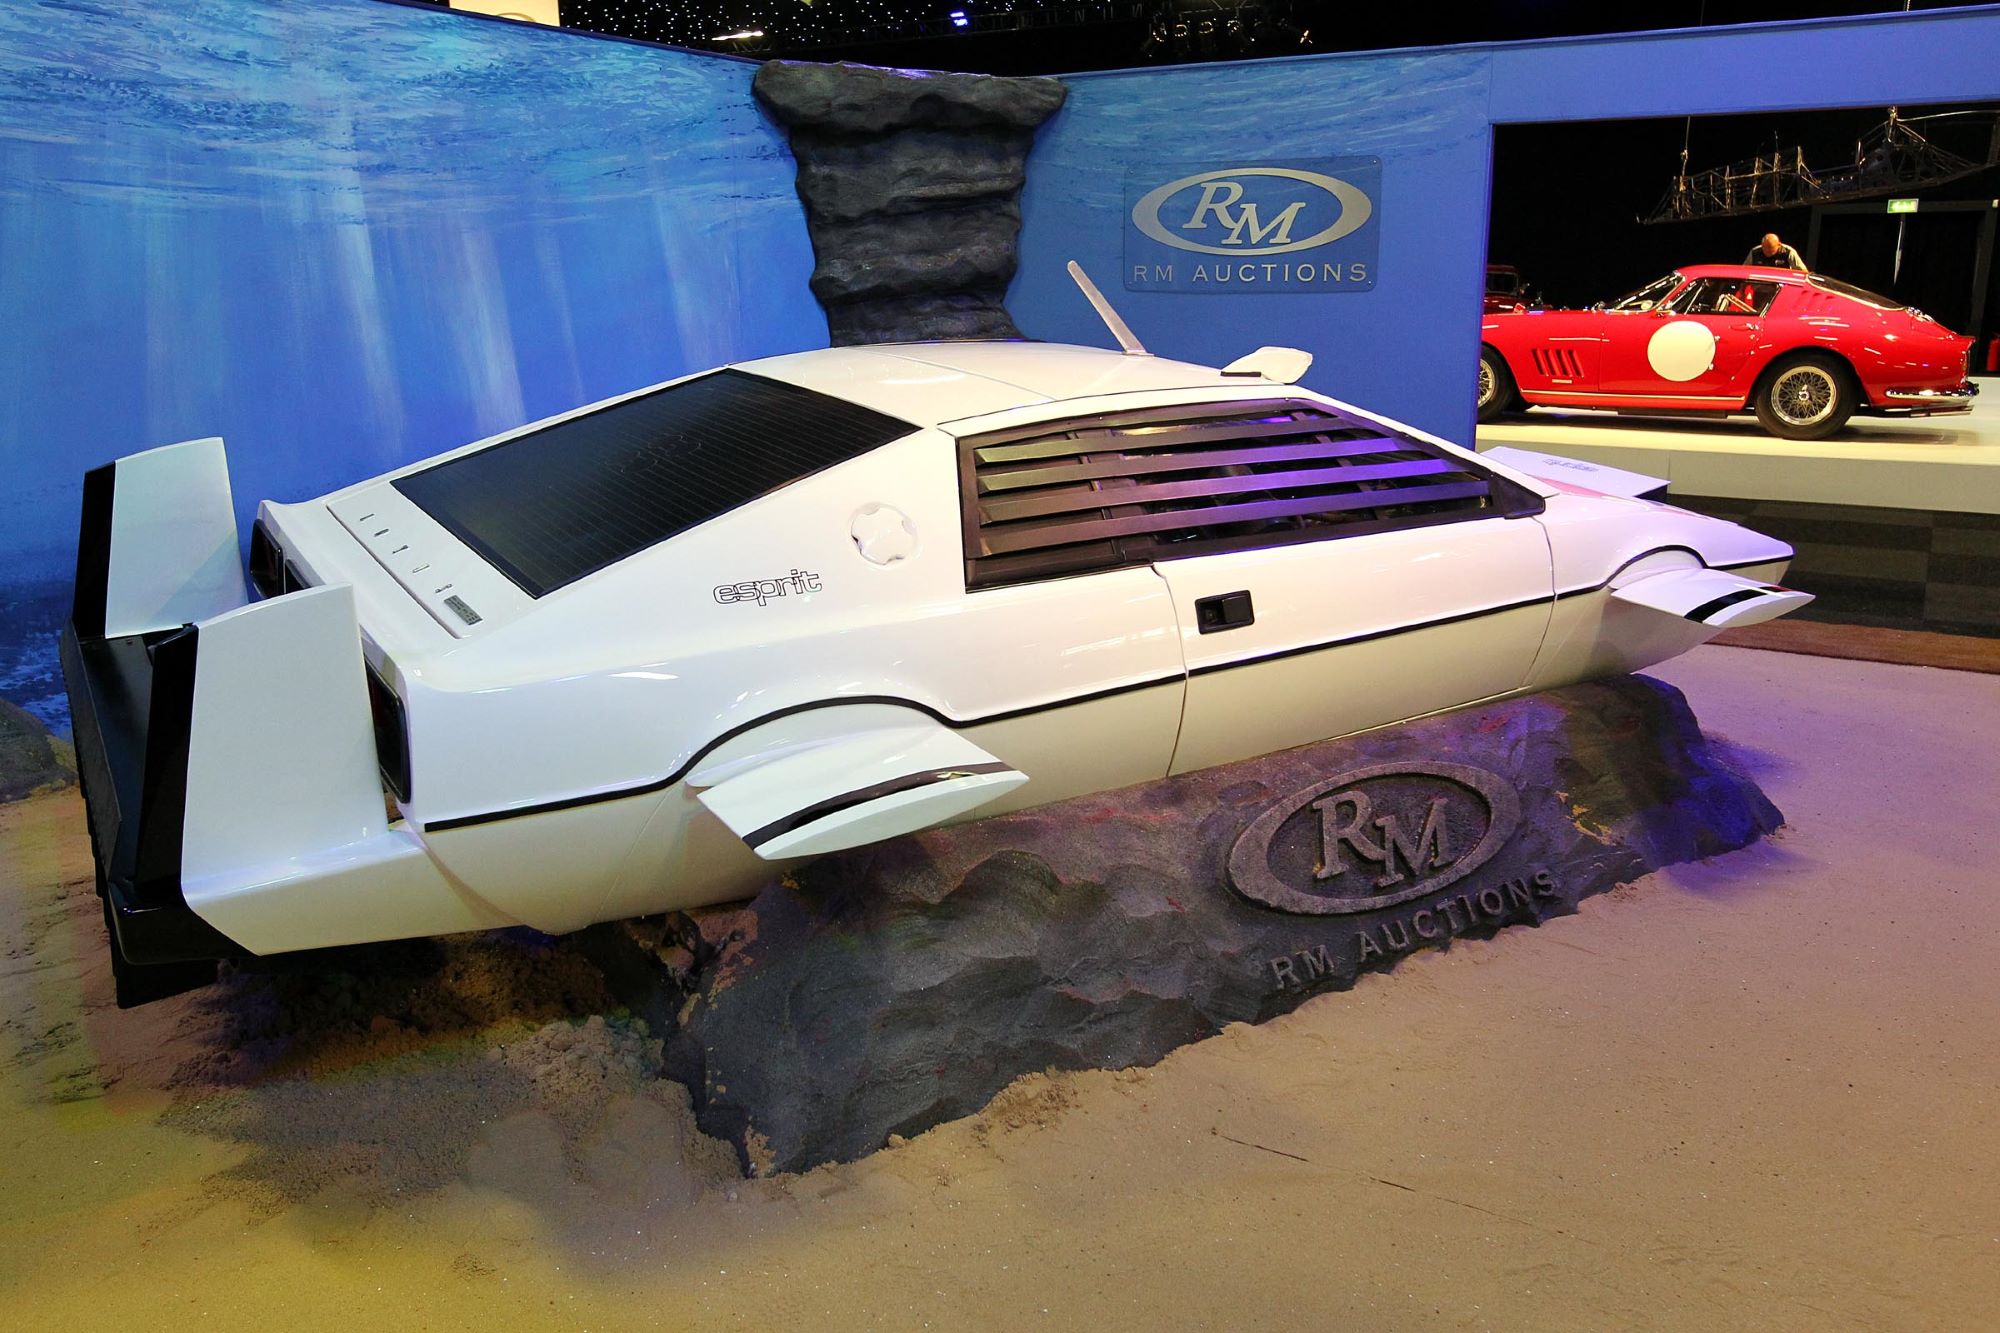 The white James Bond submarine car, used as inspiration for the Tesla Cybertruck, in front of a blue display indoors.